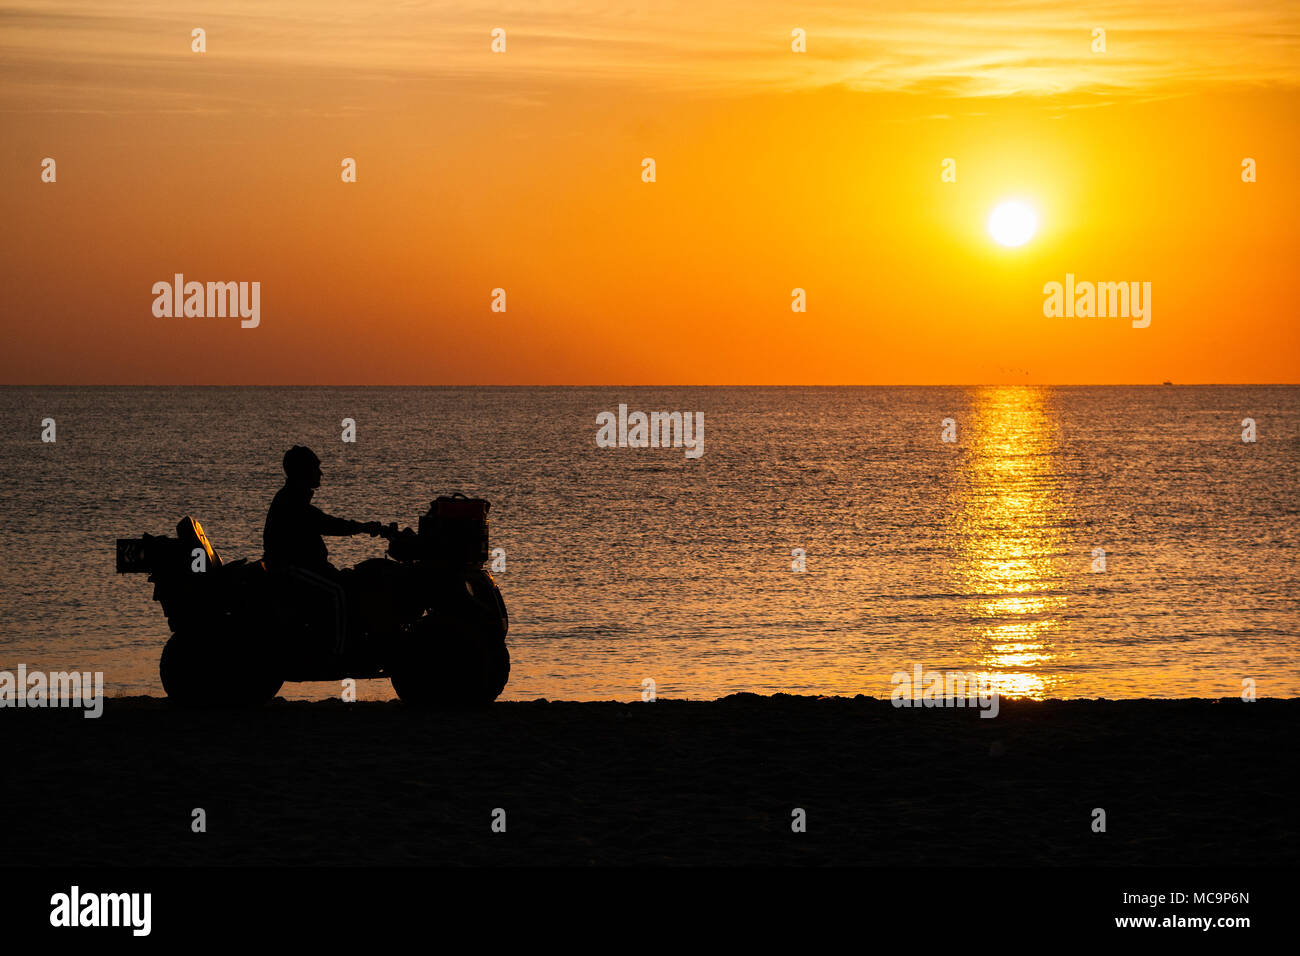 An ATV is silhouetted by the rising sun at a Florida beach with a bright colorful Yellow sky and ocean as a background.  Copy Space Stock Photo